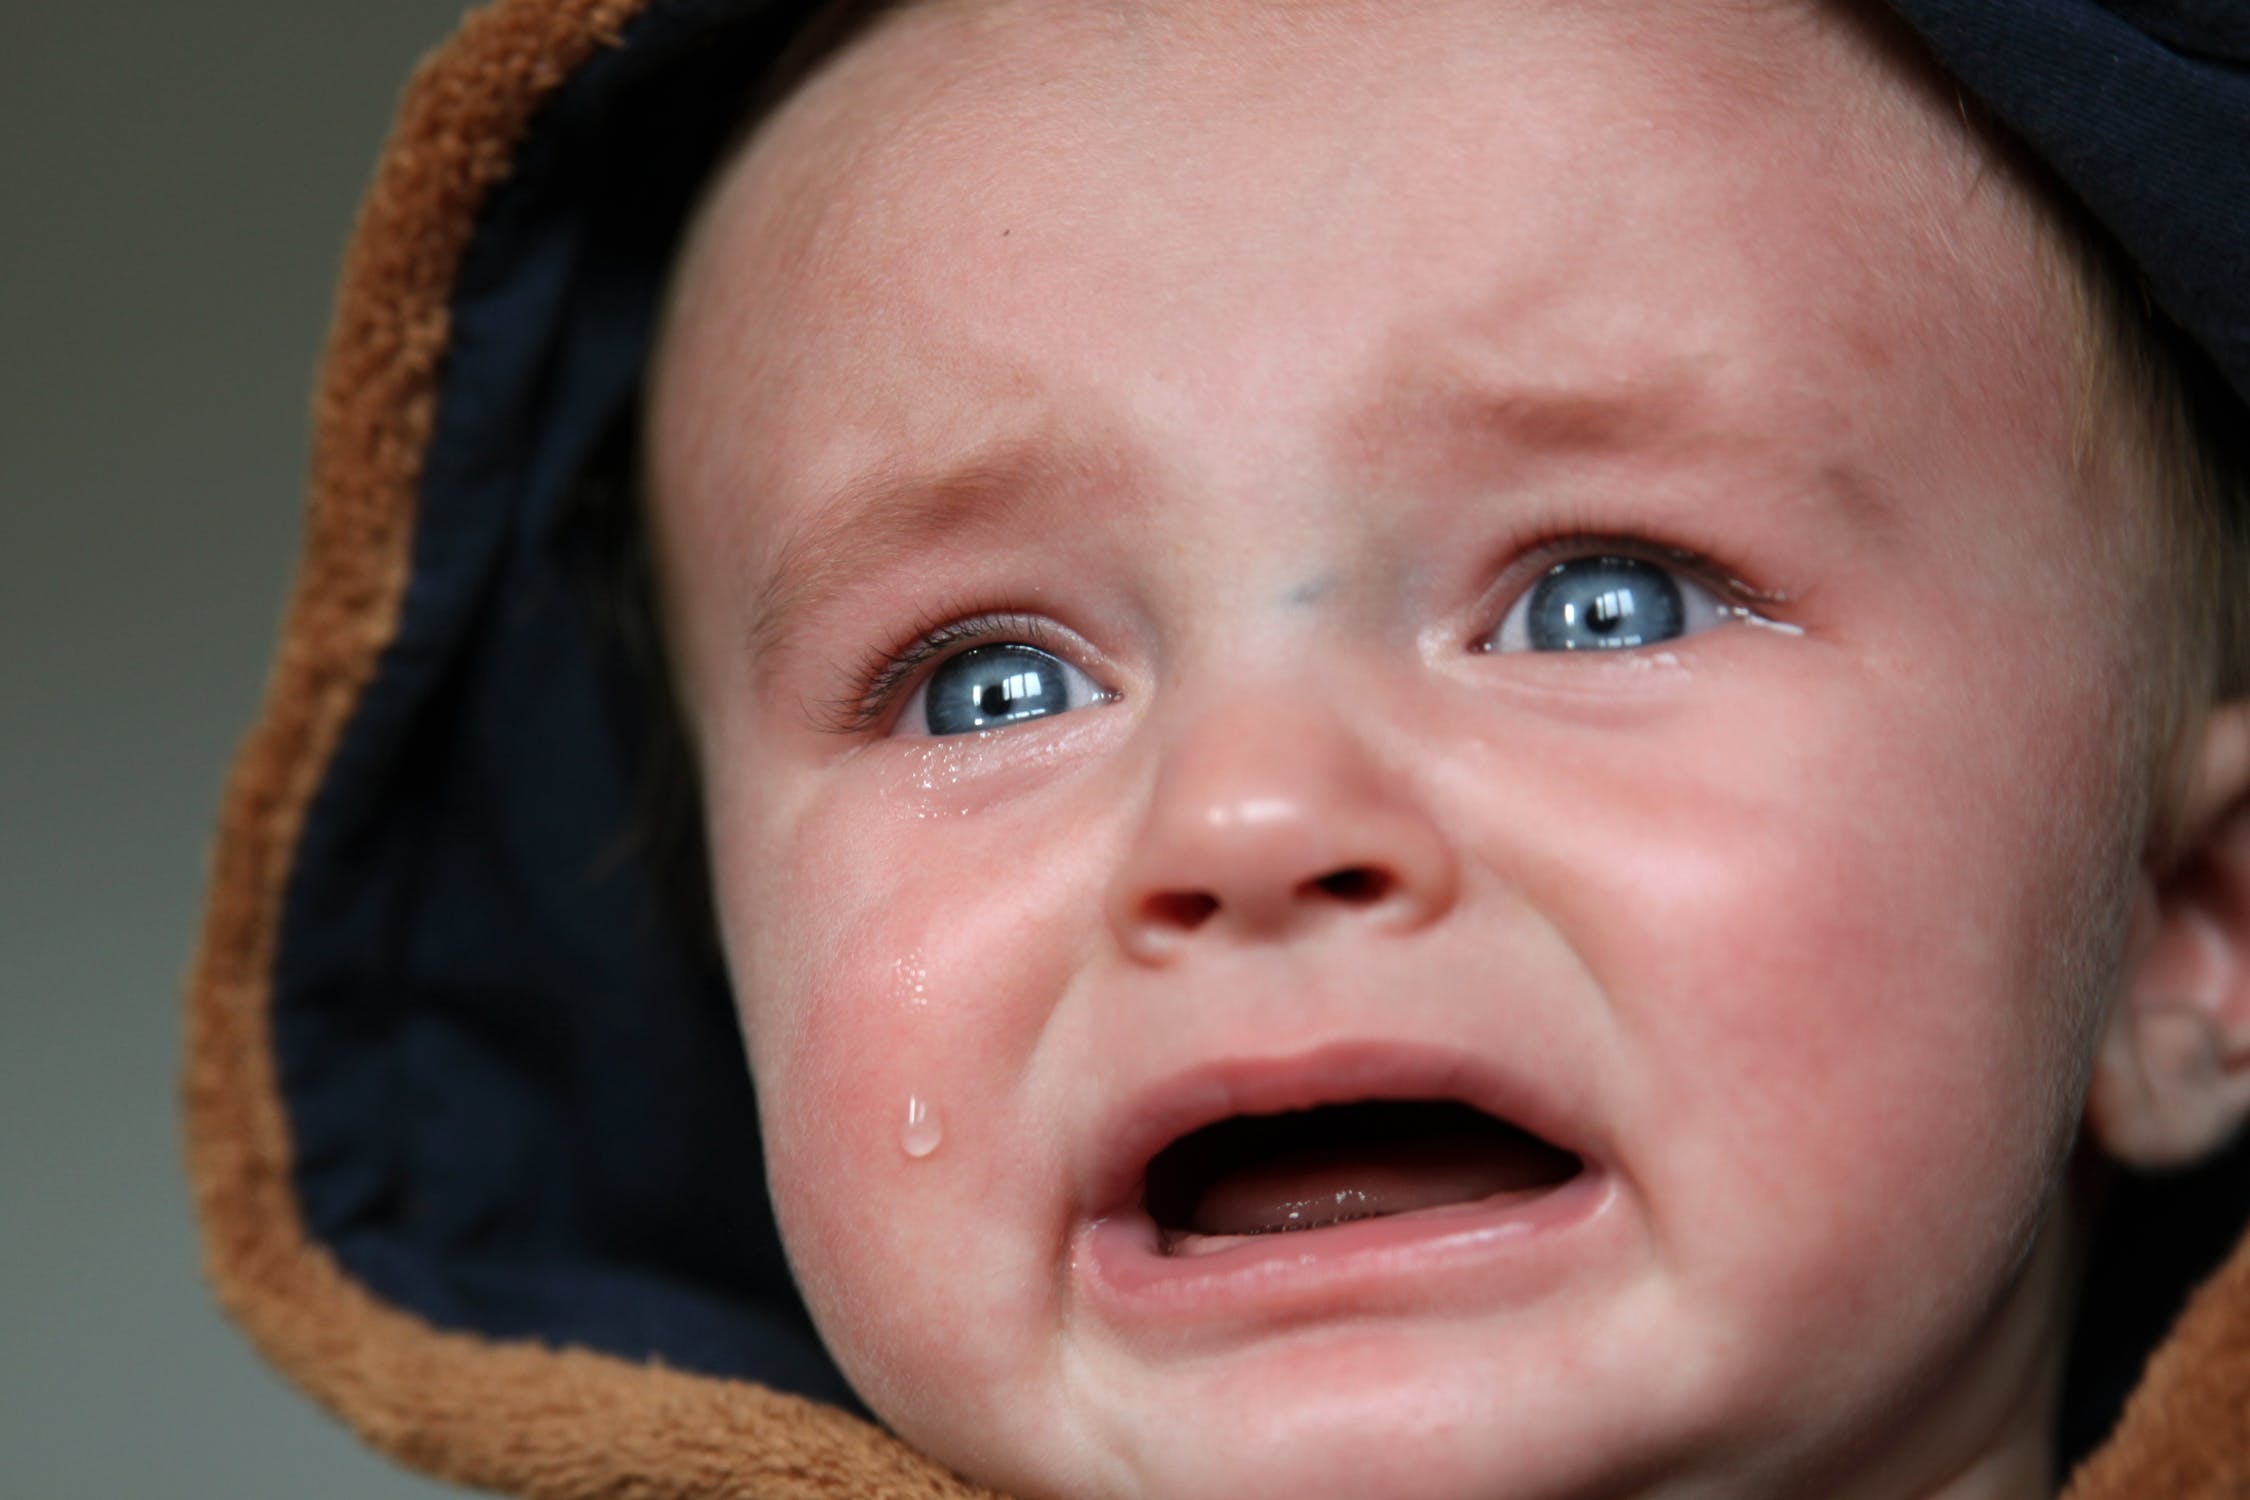 Leah just wouldn't stop crying | Source: Pexels